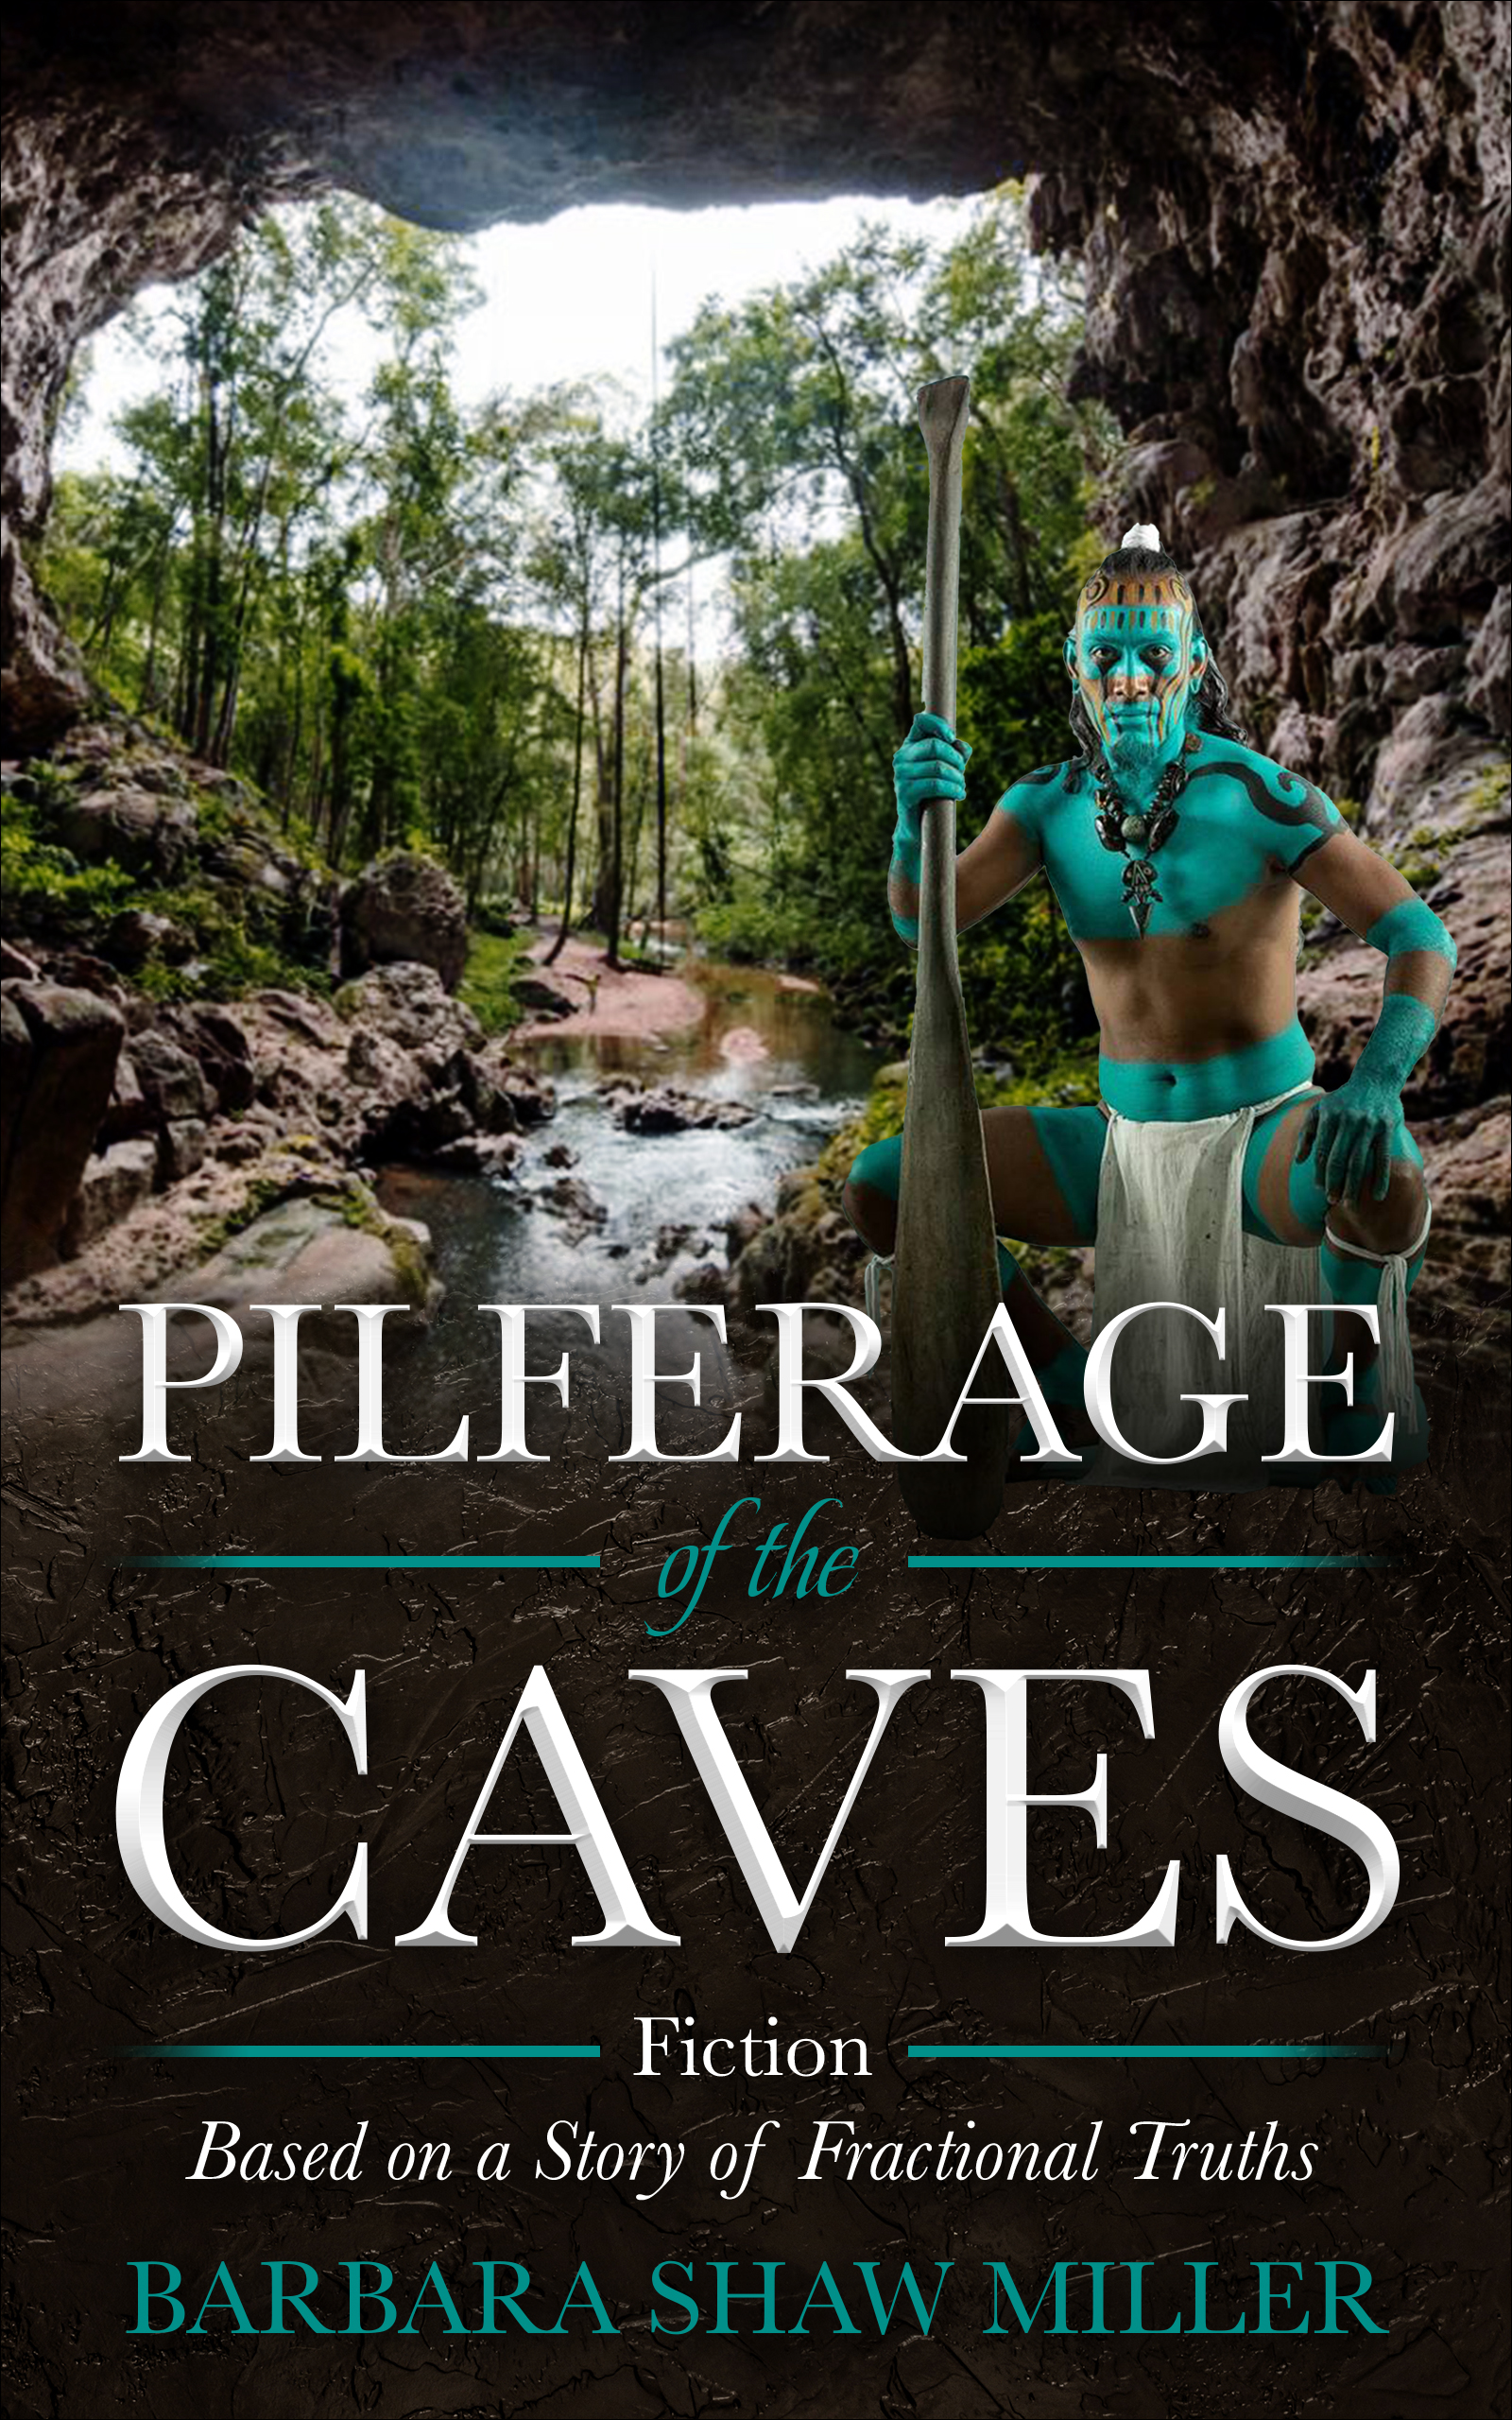 Pilferage of the Caves by Barbara Shaw Miller _Spotlight Publishing House